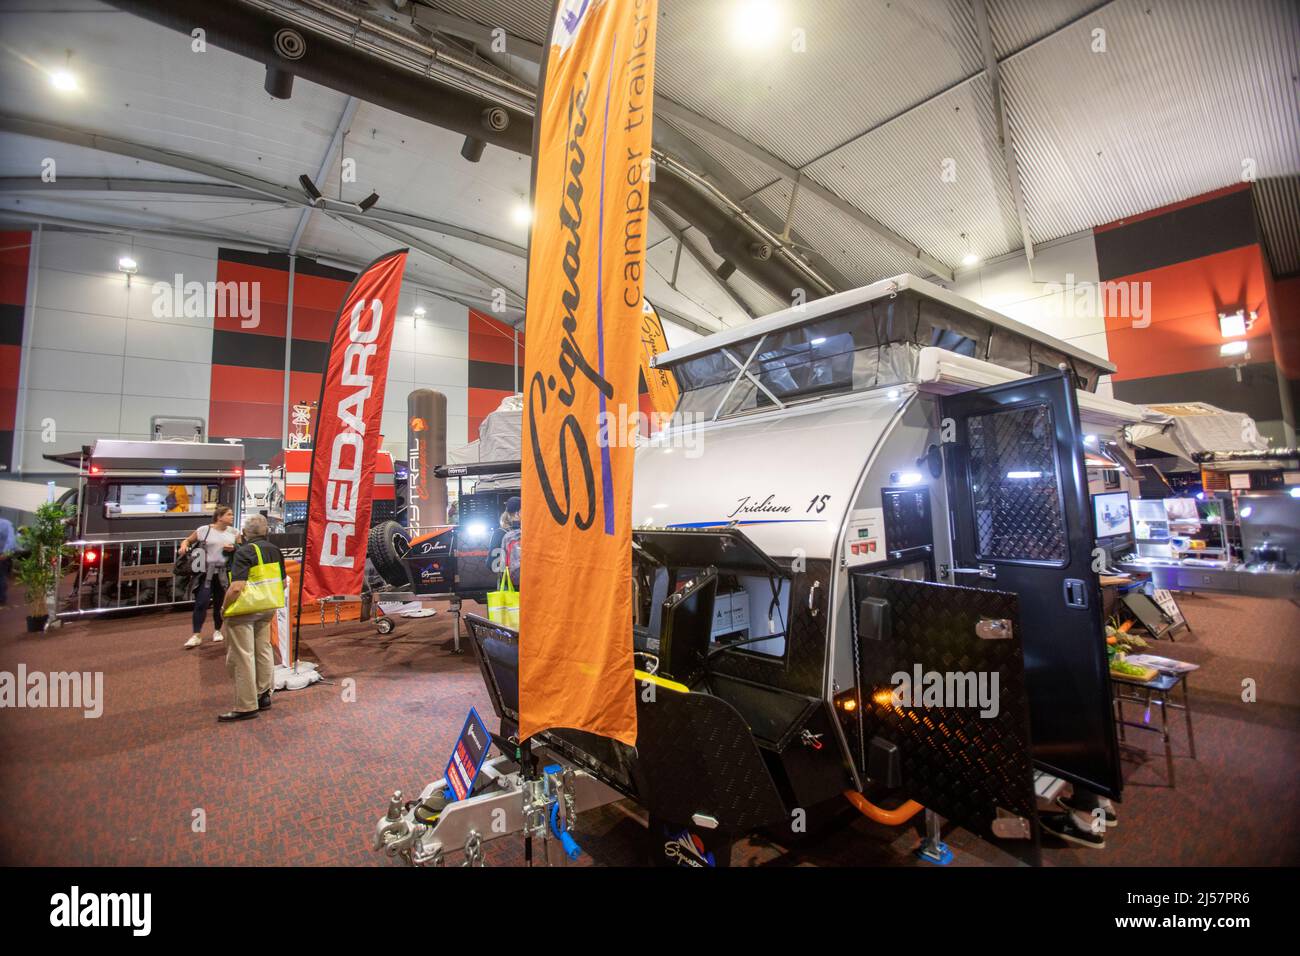 Signature camper trailer hybrid at the sydney caravan and camping show,NSW,Australia Stock Photo